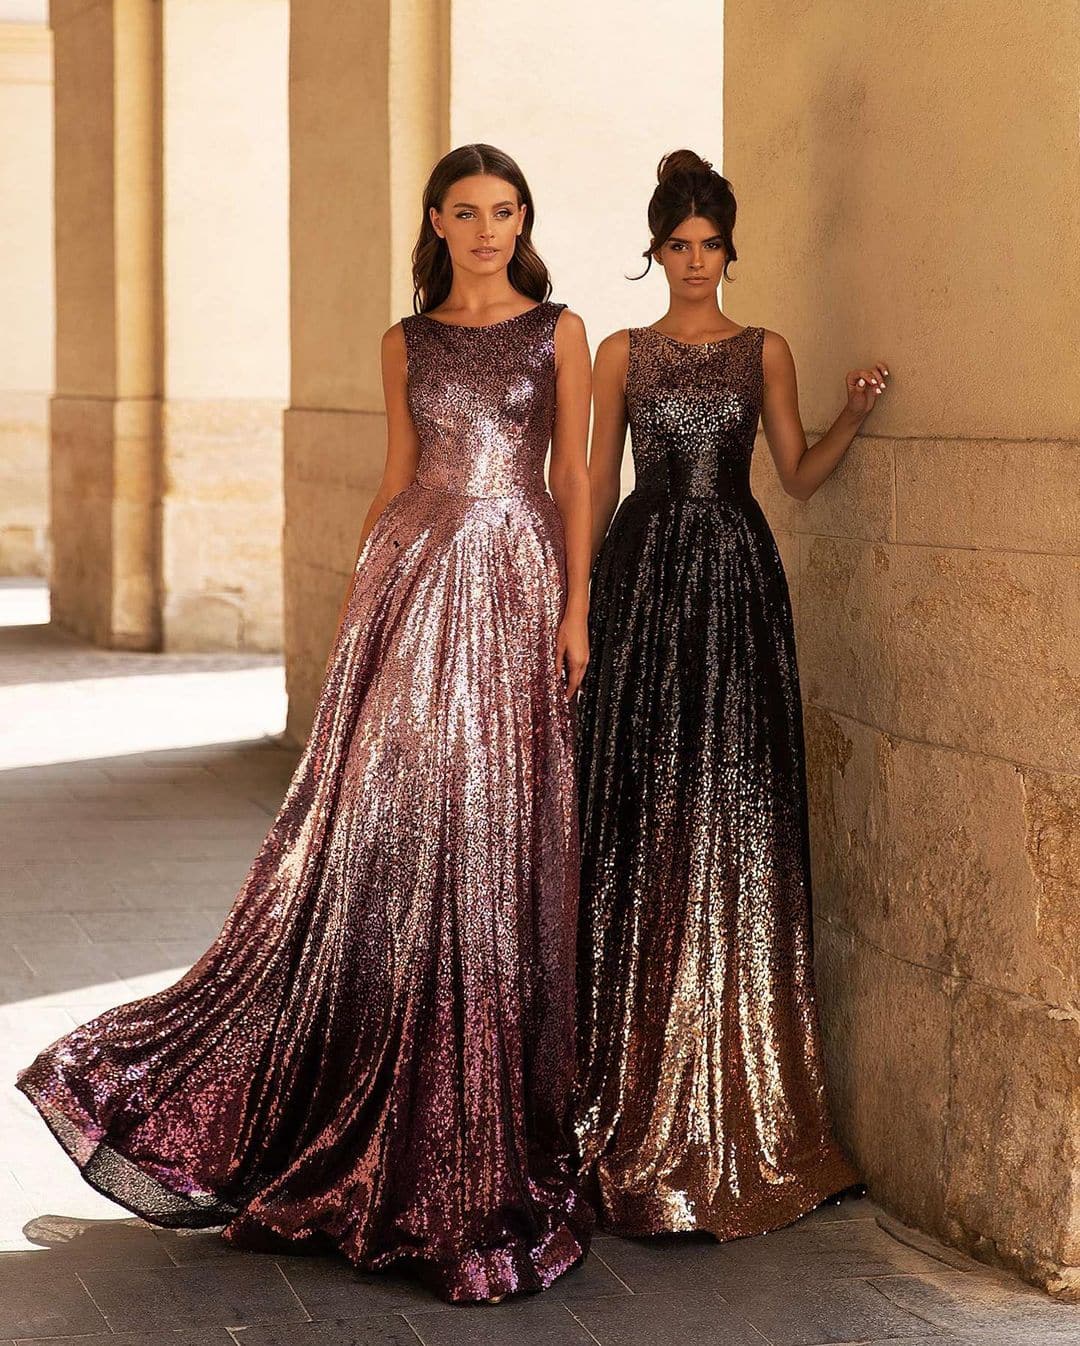 New Burgundy Strapless Ball Gown Princess Quinceanera Dresses Lace Bodice  Basque Waist Backless Long Prom Dresses - AliExpress